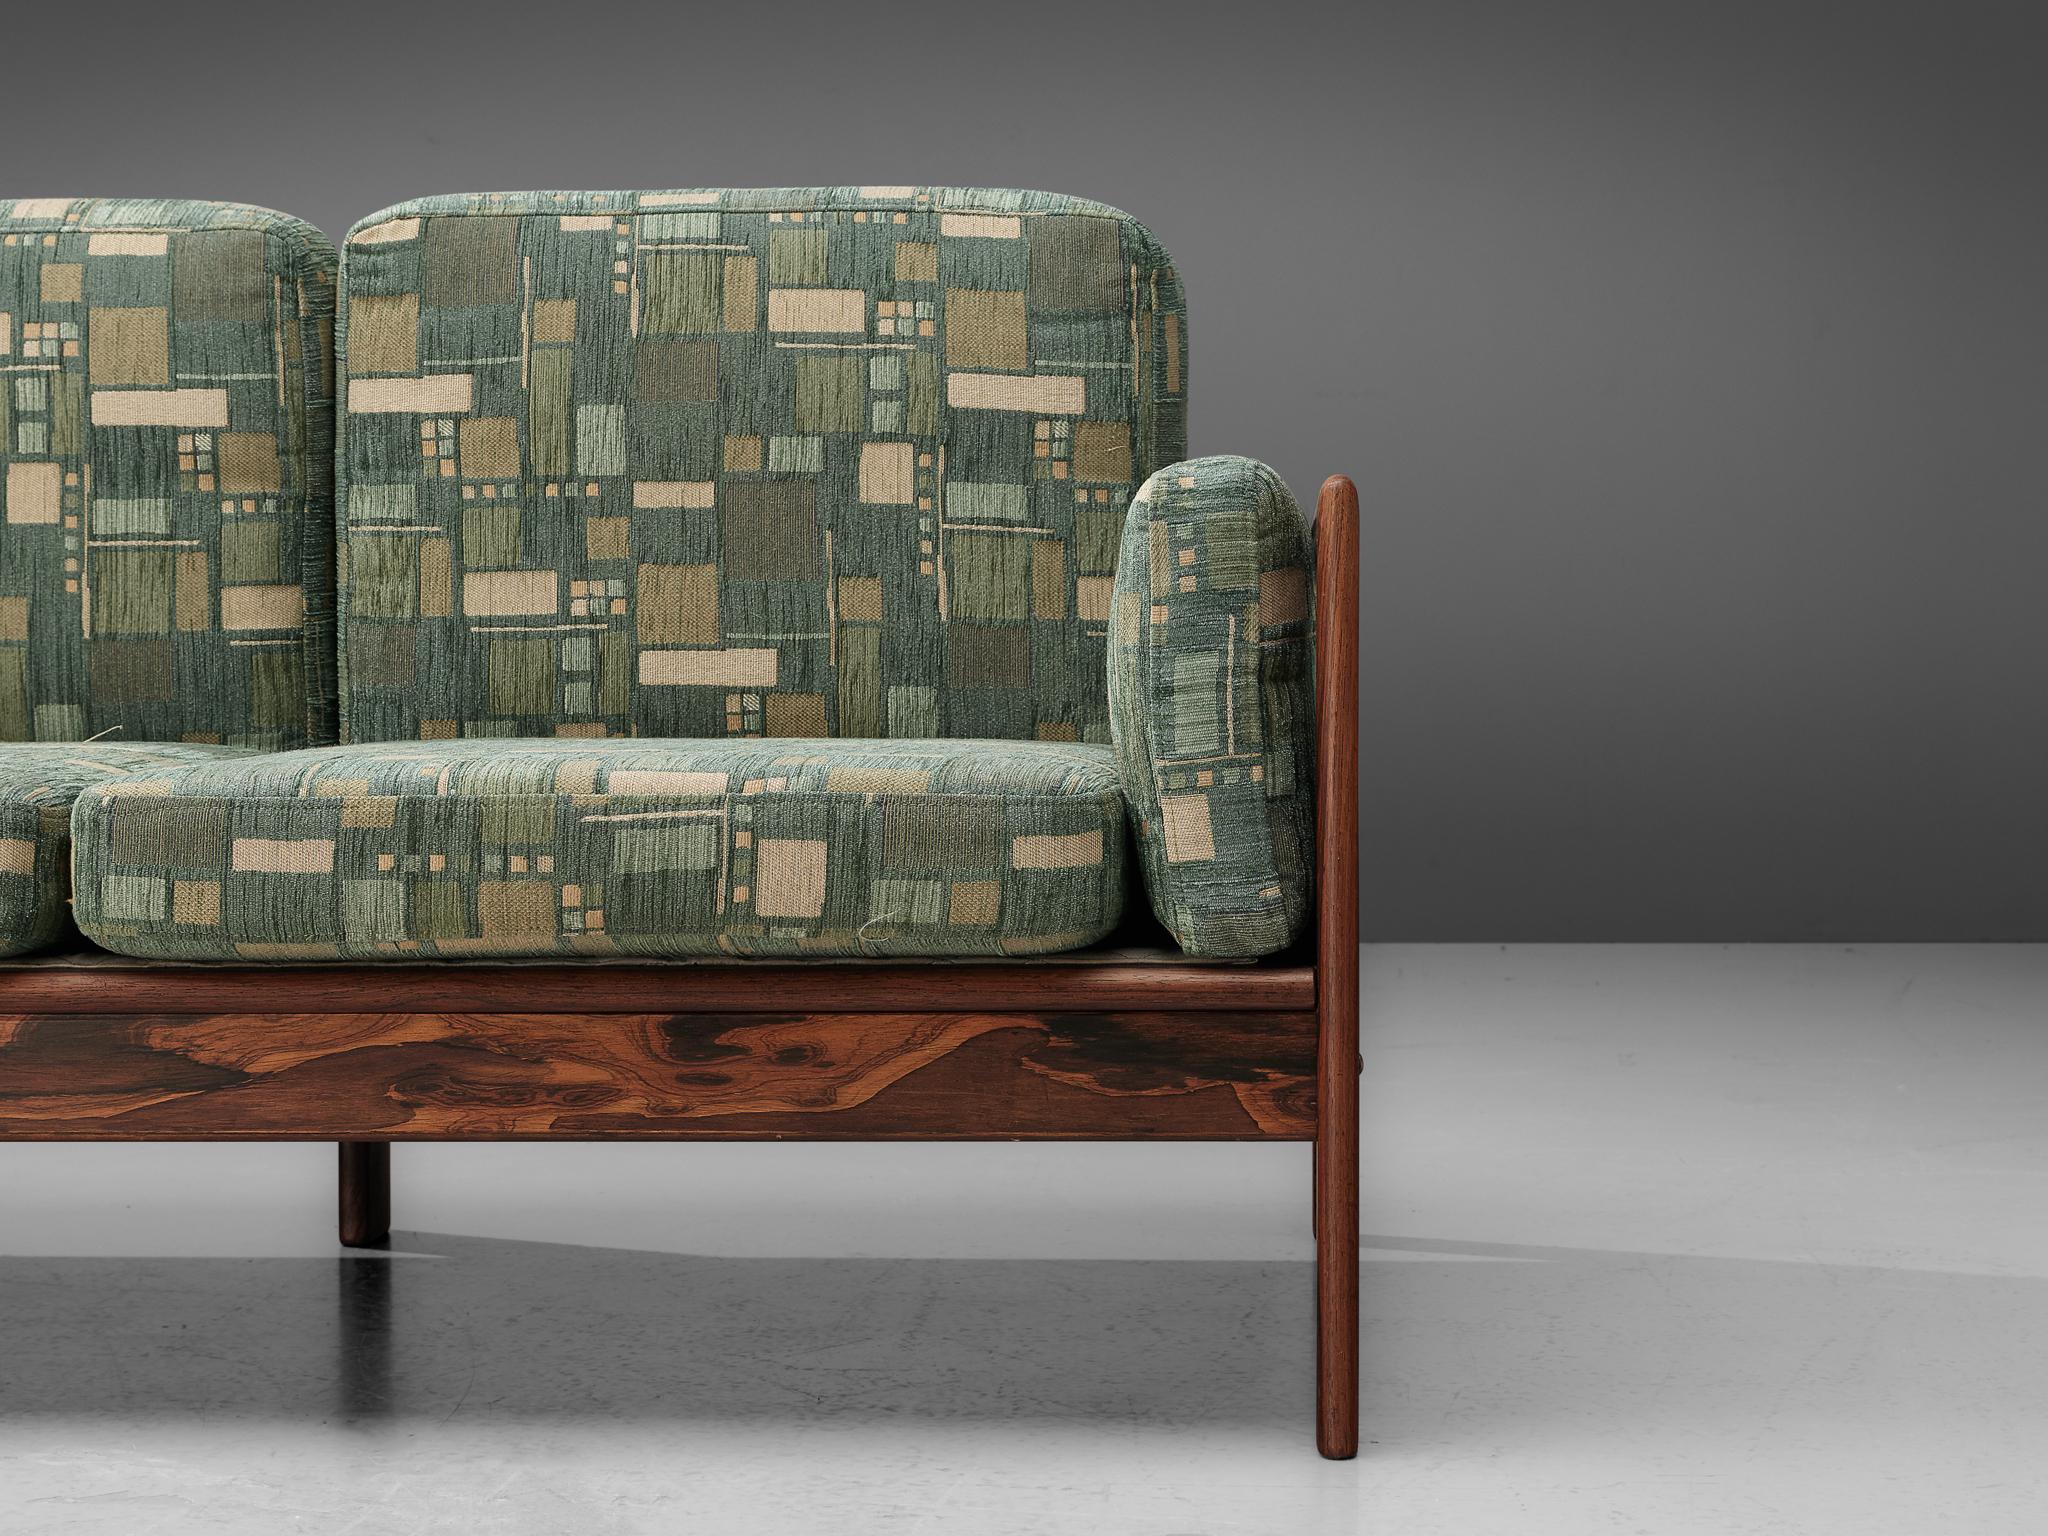 Danish Sofa in Green Patterned Upholstery 1